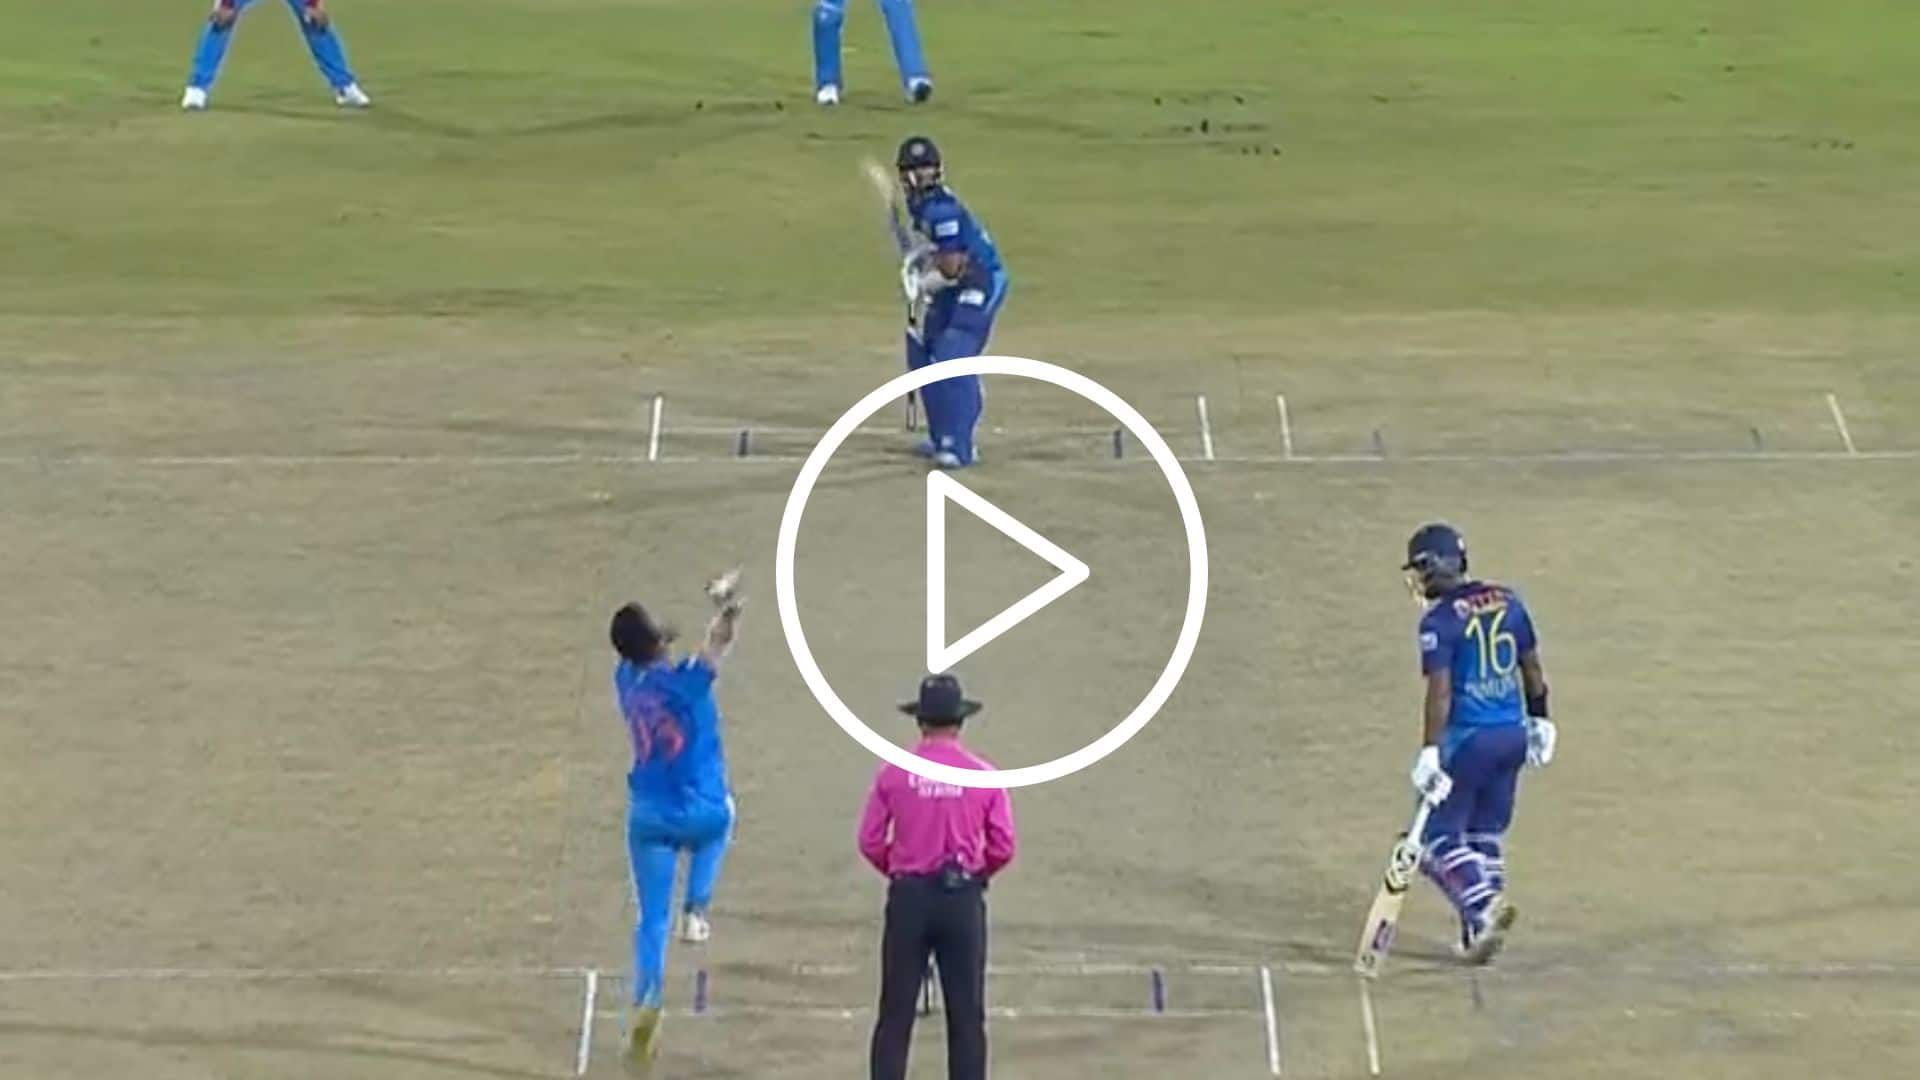 [Watch] Jasprit Bumrah Removes Kusal Mendis With a Brilliant Slow Ball